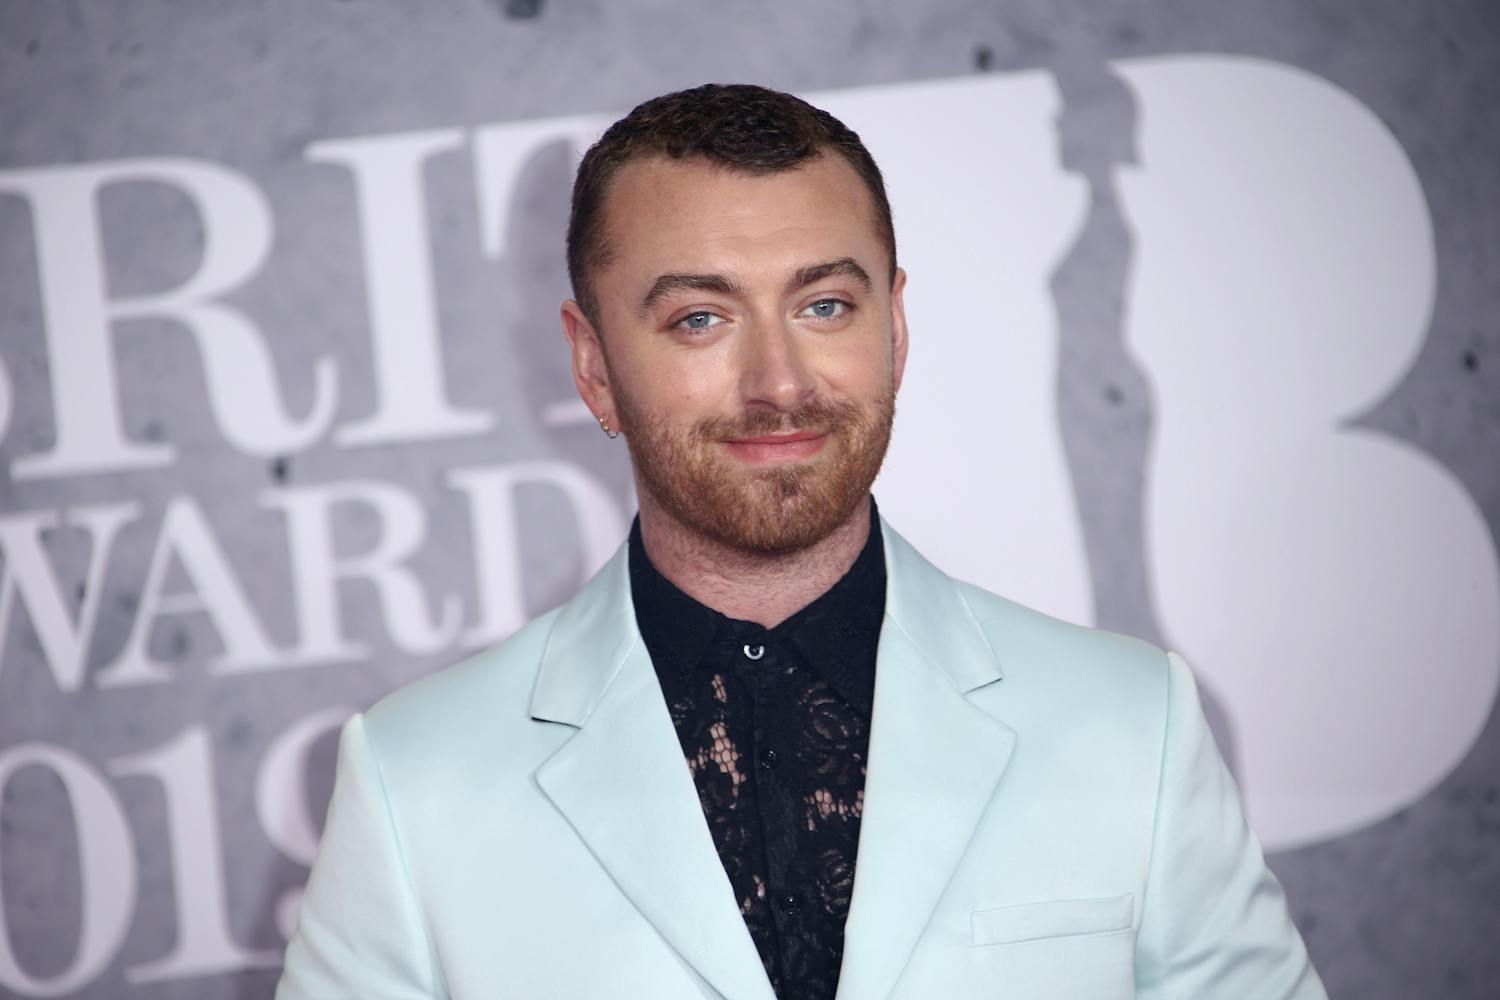 This Feb. 20, 2019, file photo shows singer Sam Smith posing for photographers upon arrival at the Brit Awards in London. The Oscar-winning pop star has declared his pronouns “they/them” on social media after coming out as non-binary in his “lifetime of being at war with my gender.” The English “Too Good at Goodbyes” singer said Friday, Sept. 13, 2019, he’s decided to “embrace myself for who I am, inside and out ...” (Photo by Joel C Ryan/Invision/AP, File)